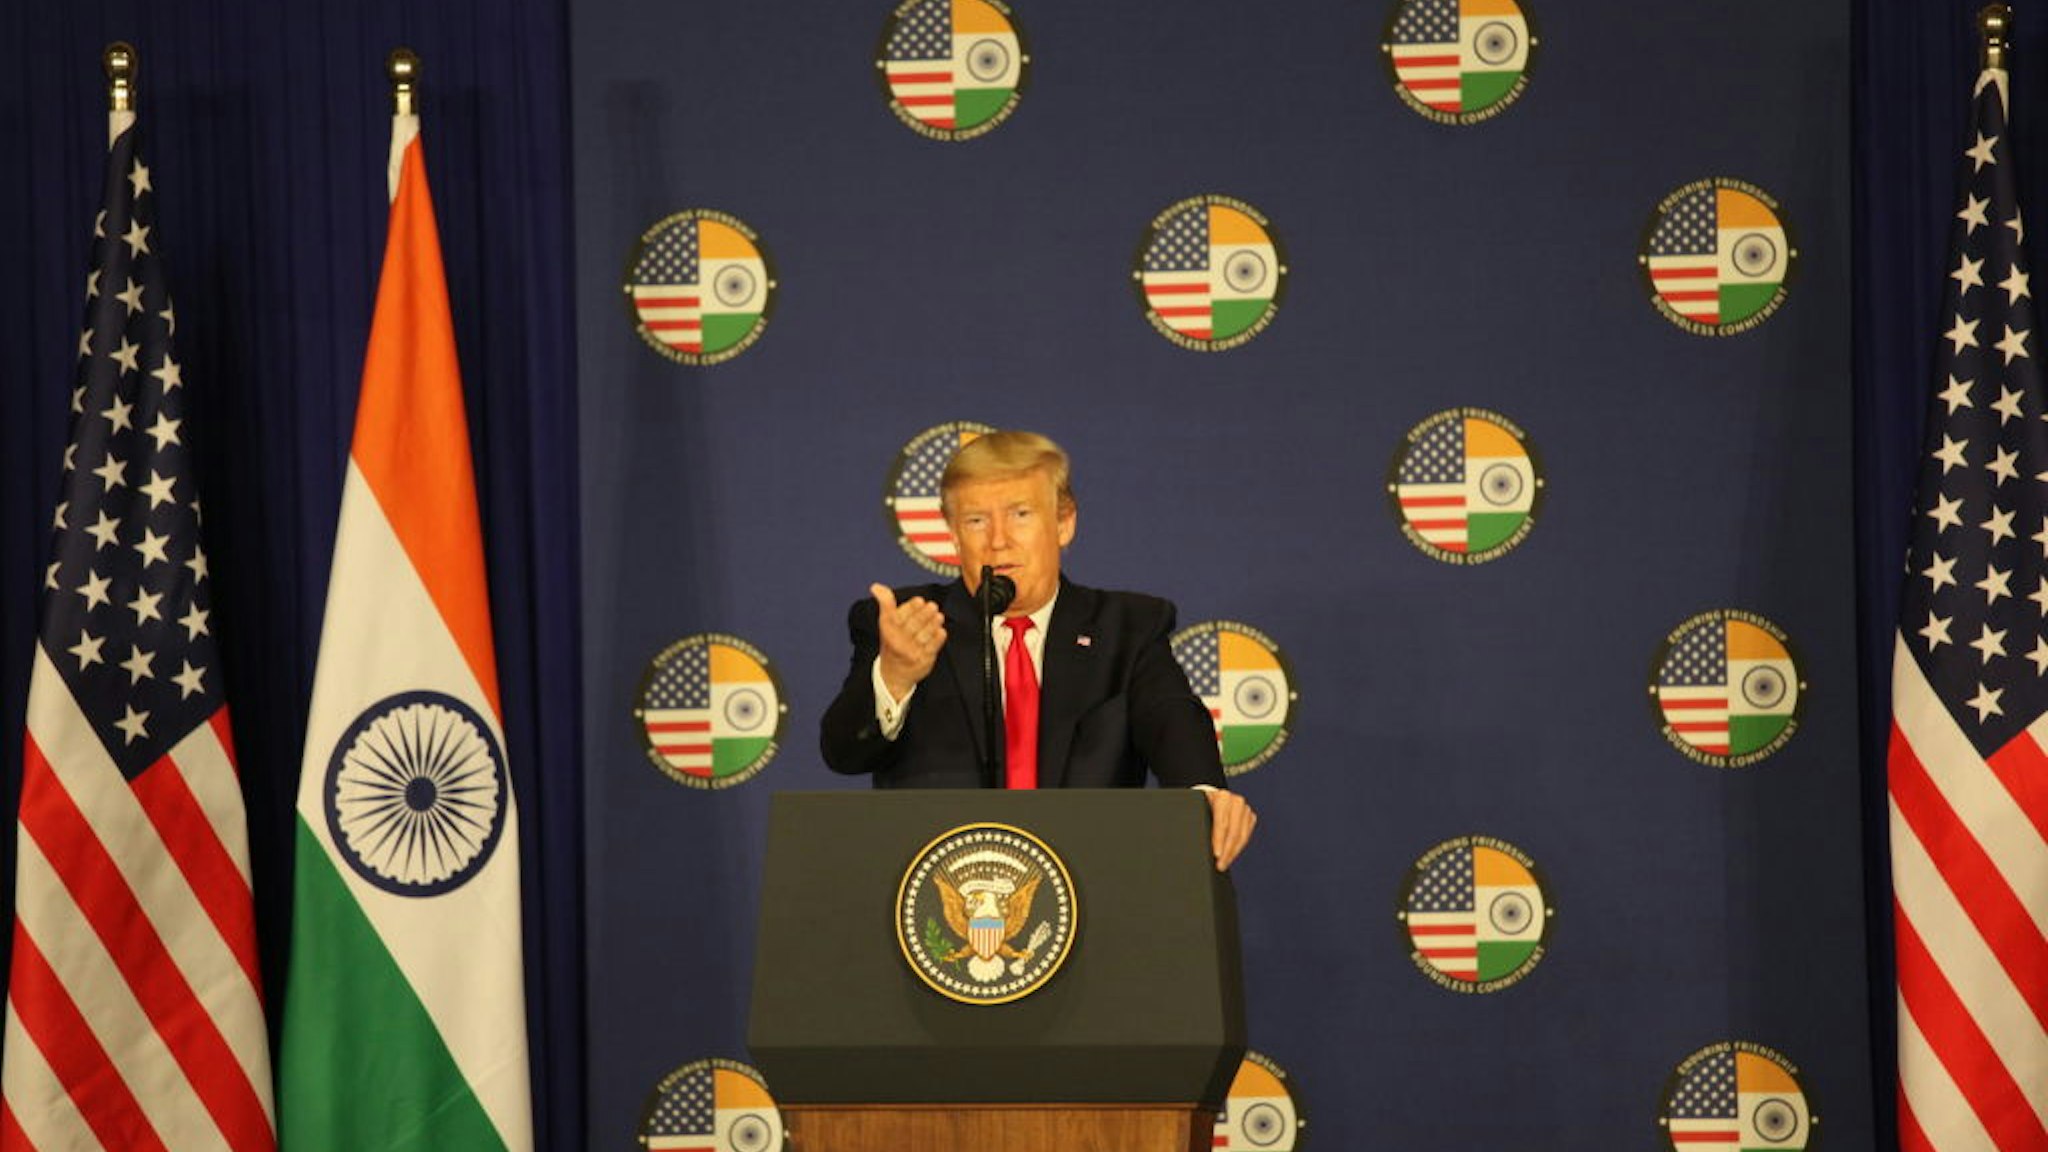 US President Donald Trump holds a press conference at the India and America summit meeting at Hyderabad House on February 25, 2020 in New Delhi, India.